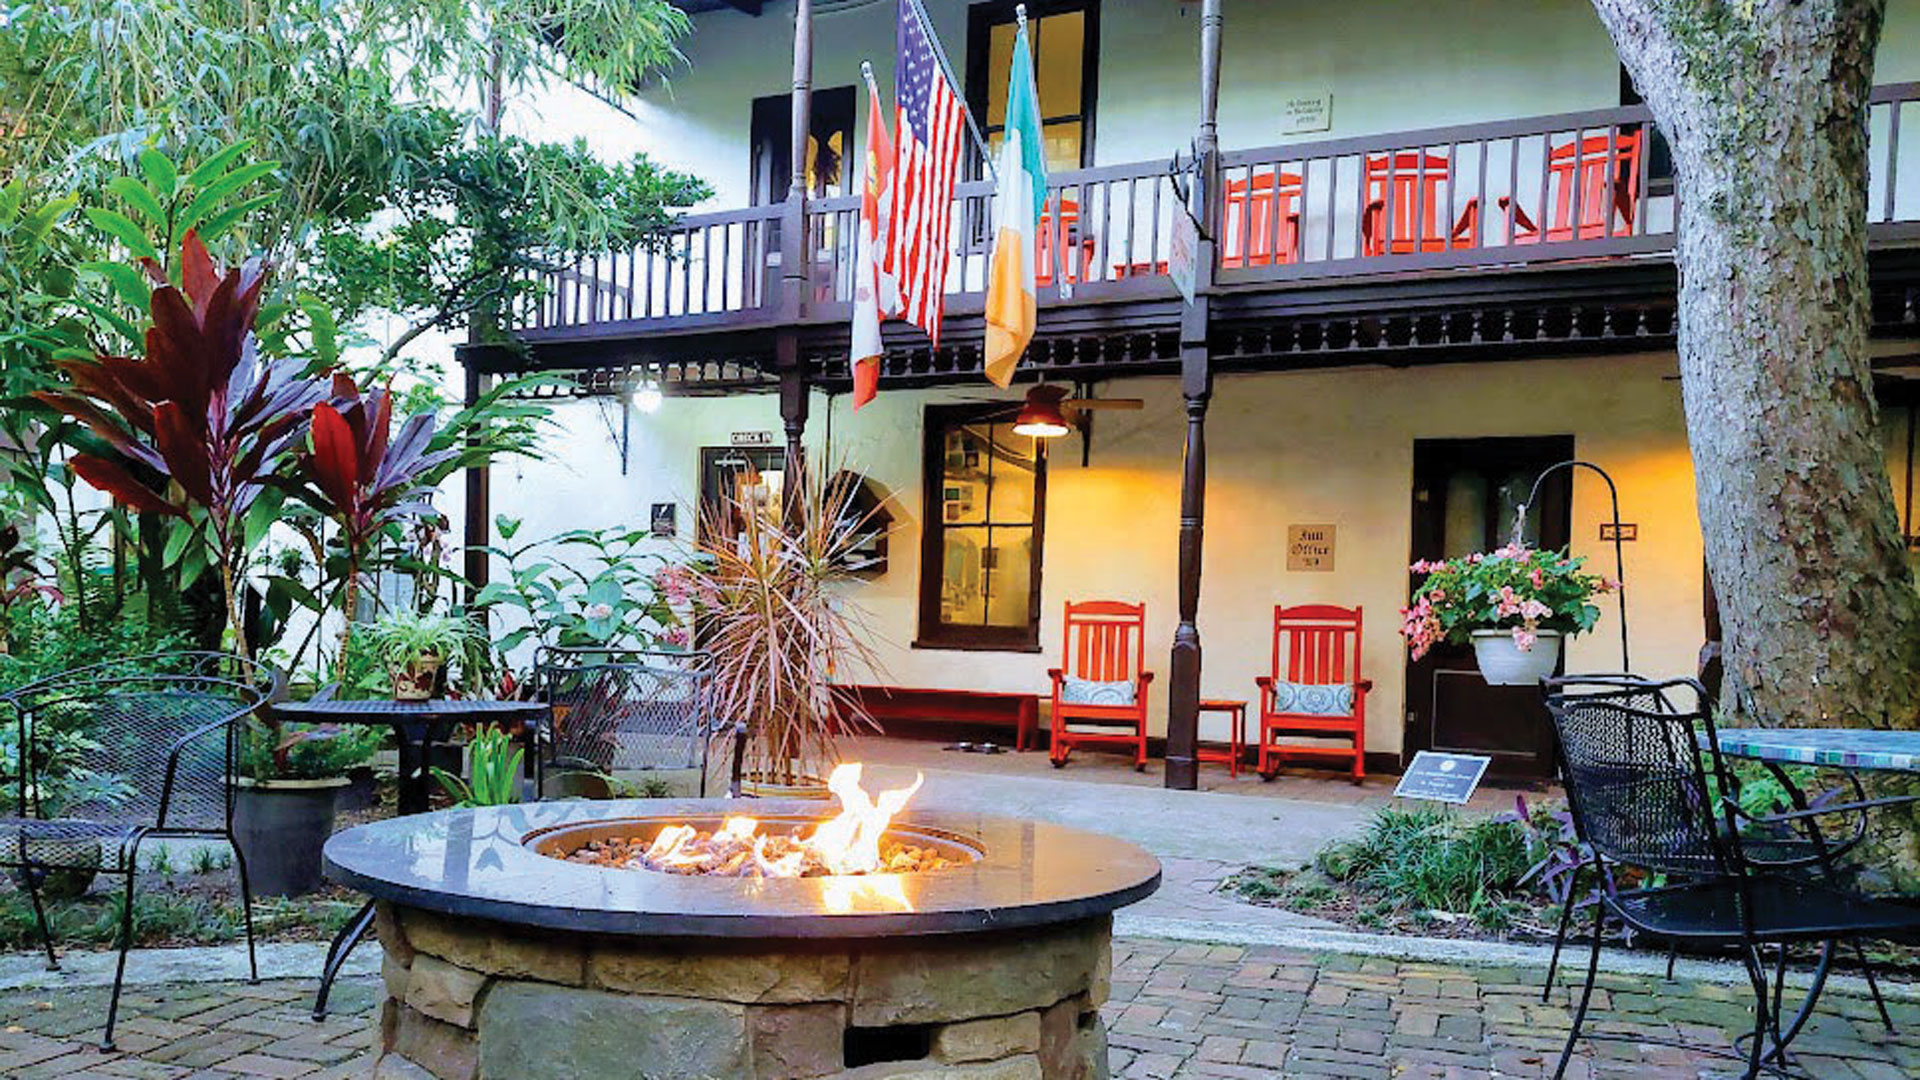 The St. Francis Inn offers guests a taste of European-inspired charm in St. Augustine, Florida.